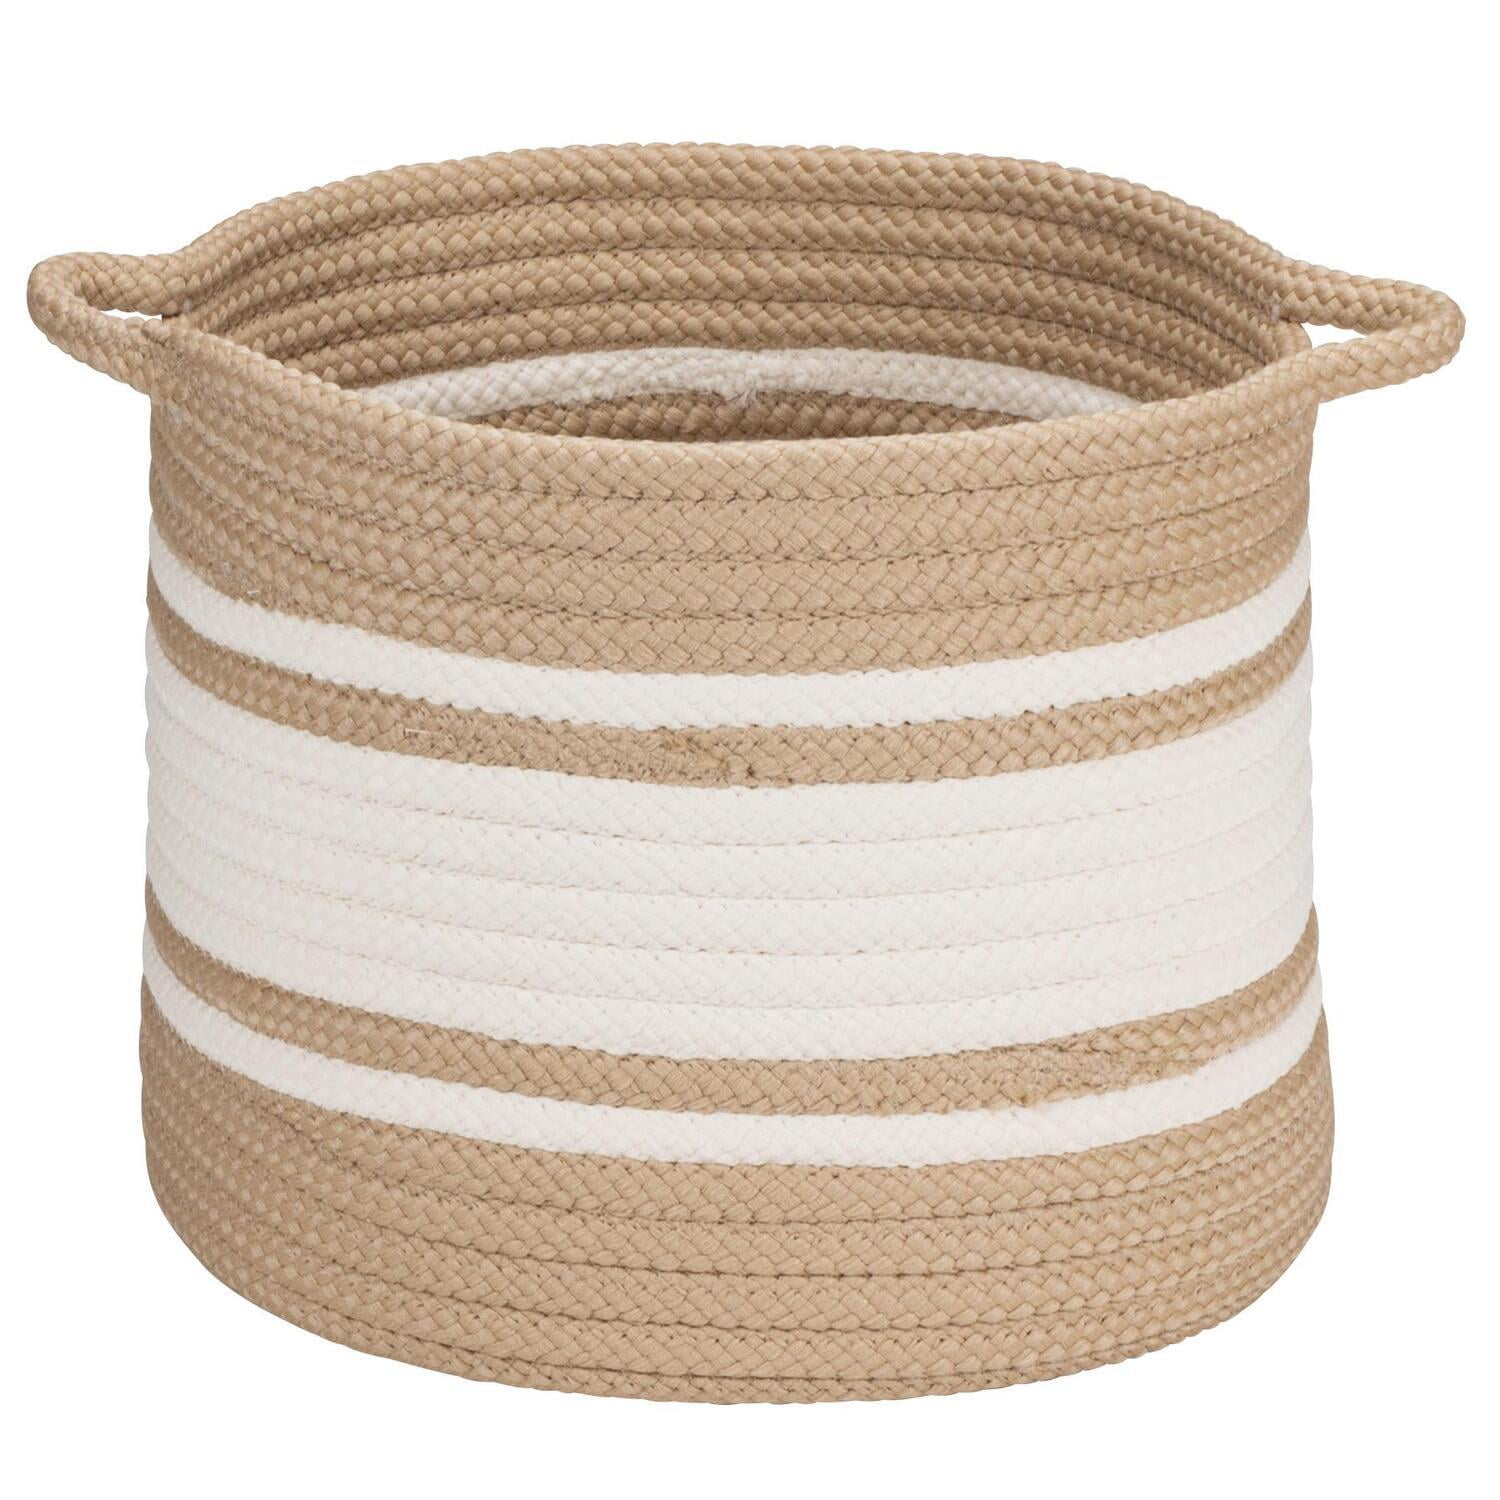 Colonia Mills Bs43 Outland Basket, Sand - 20 X 20 X 18 In.